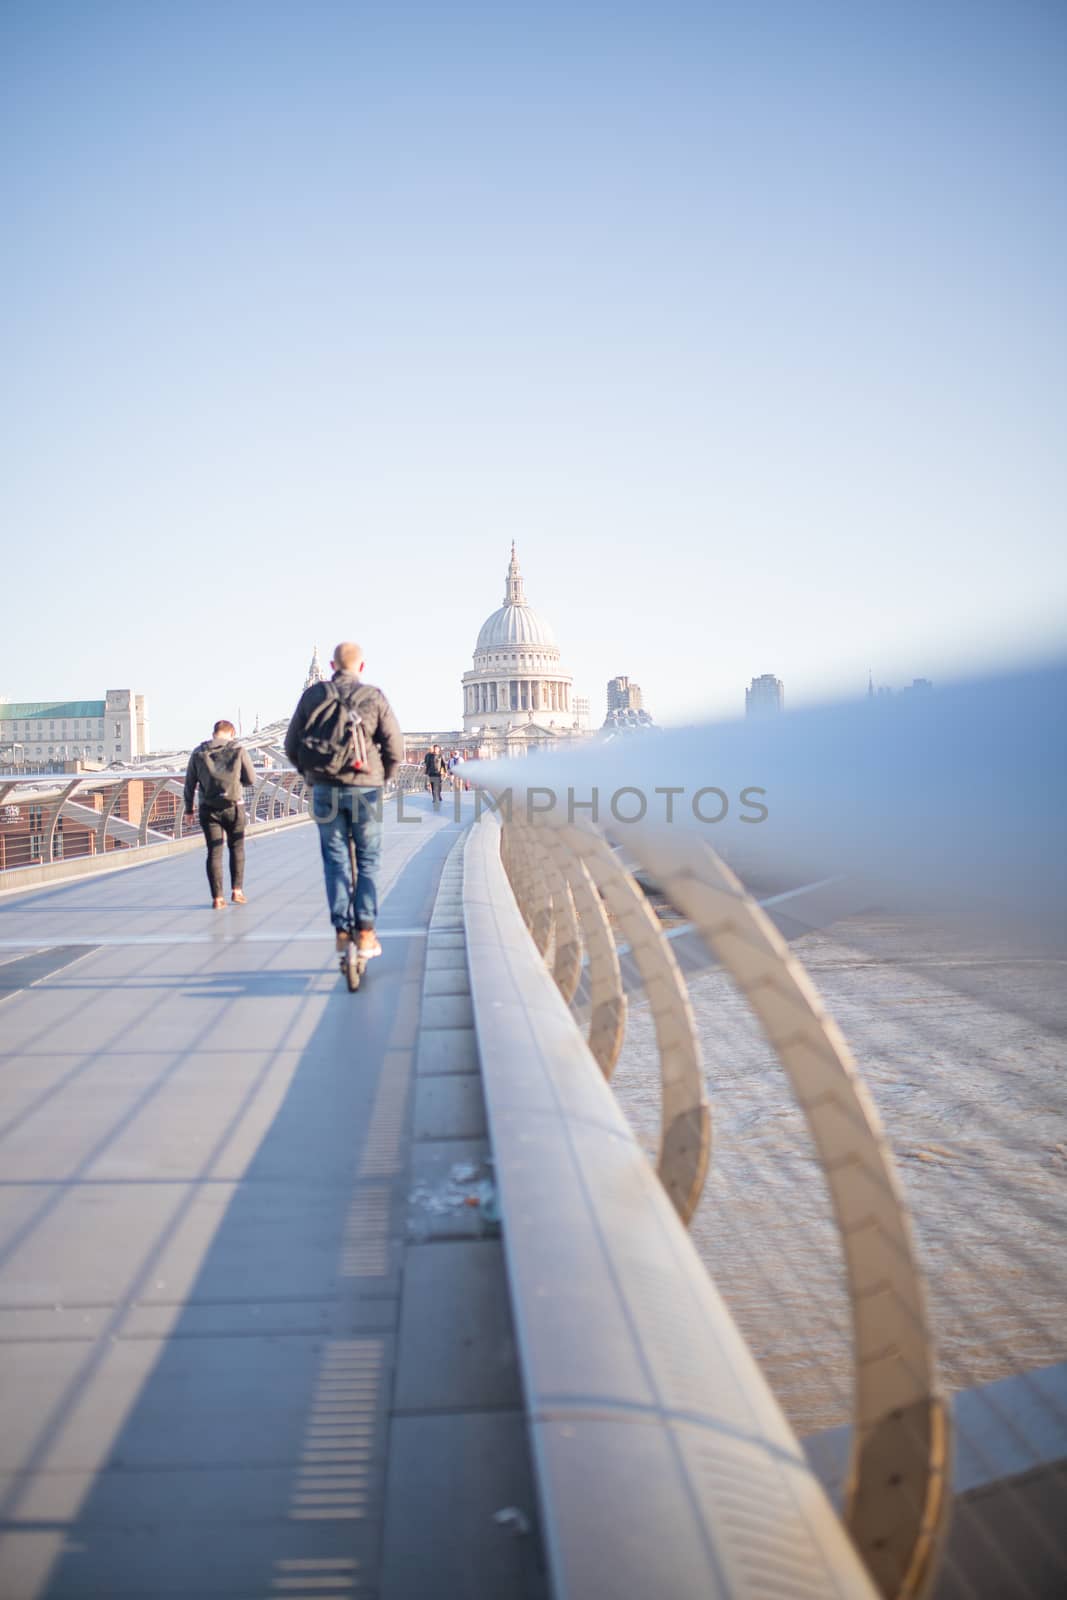 Photo of St Pauls Cathedral from Millenium Bridge with People Walking by Kanelbulle